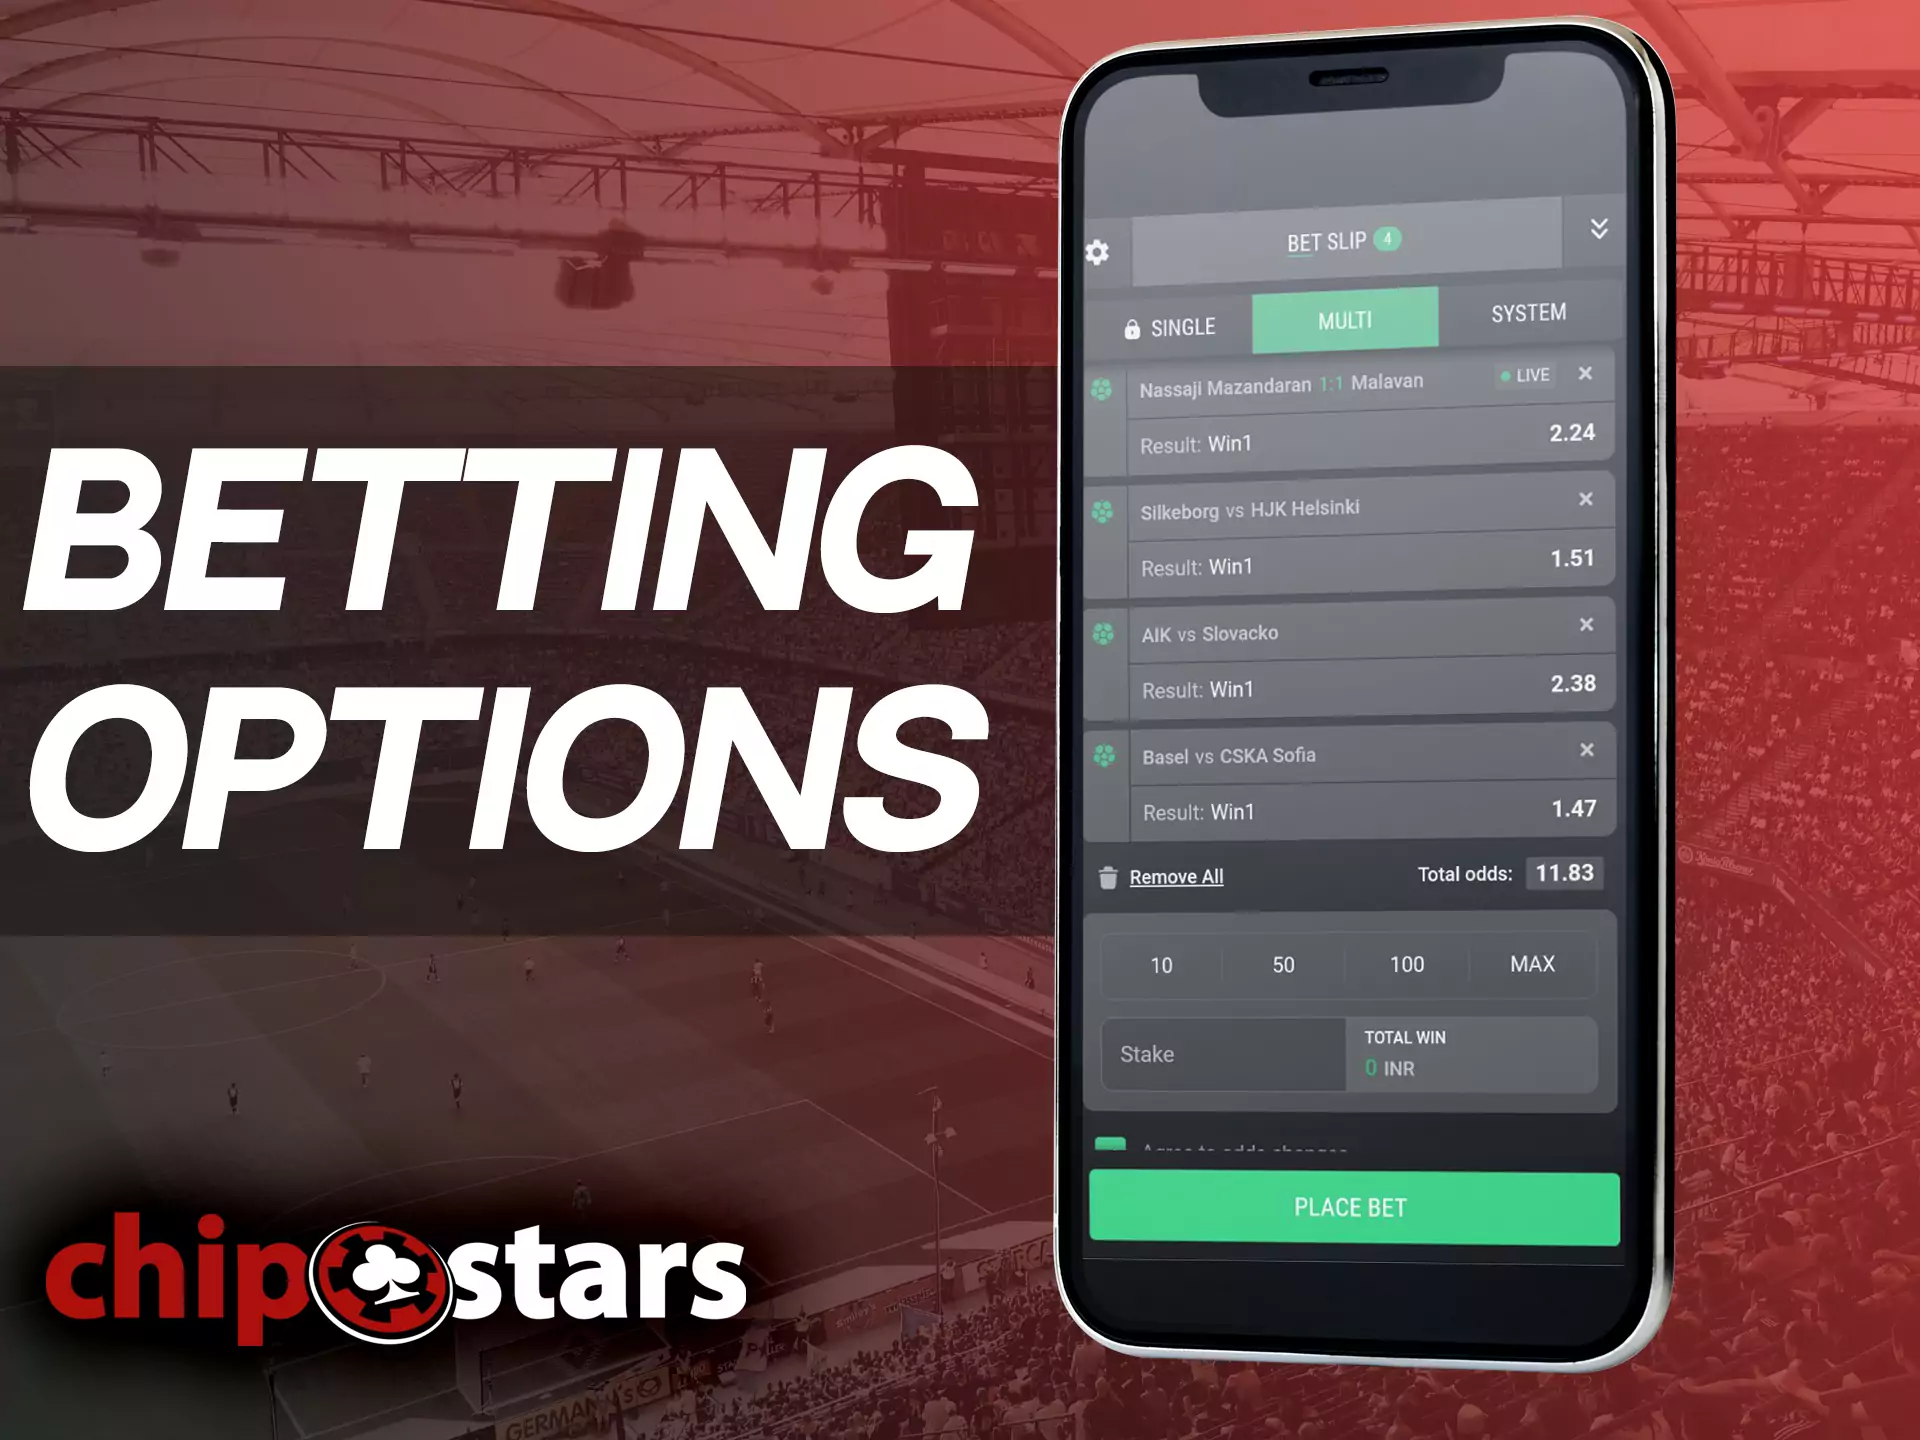 You can combine different types of bets in the Chipstars sportsbook.